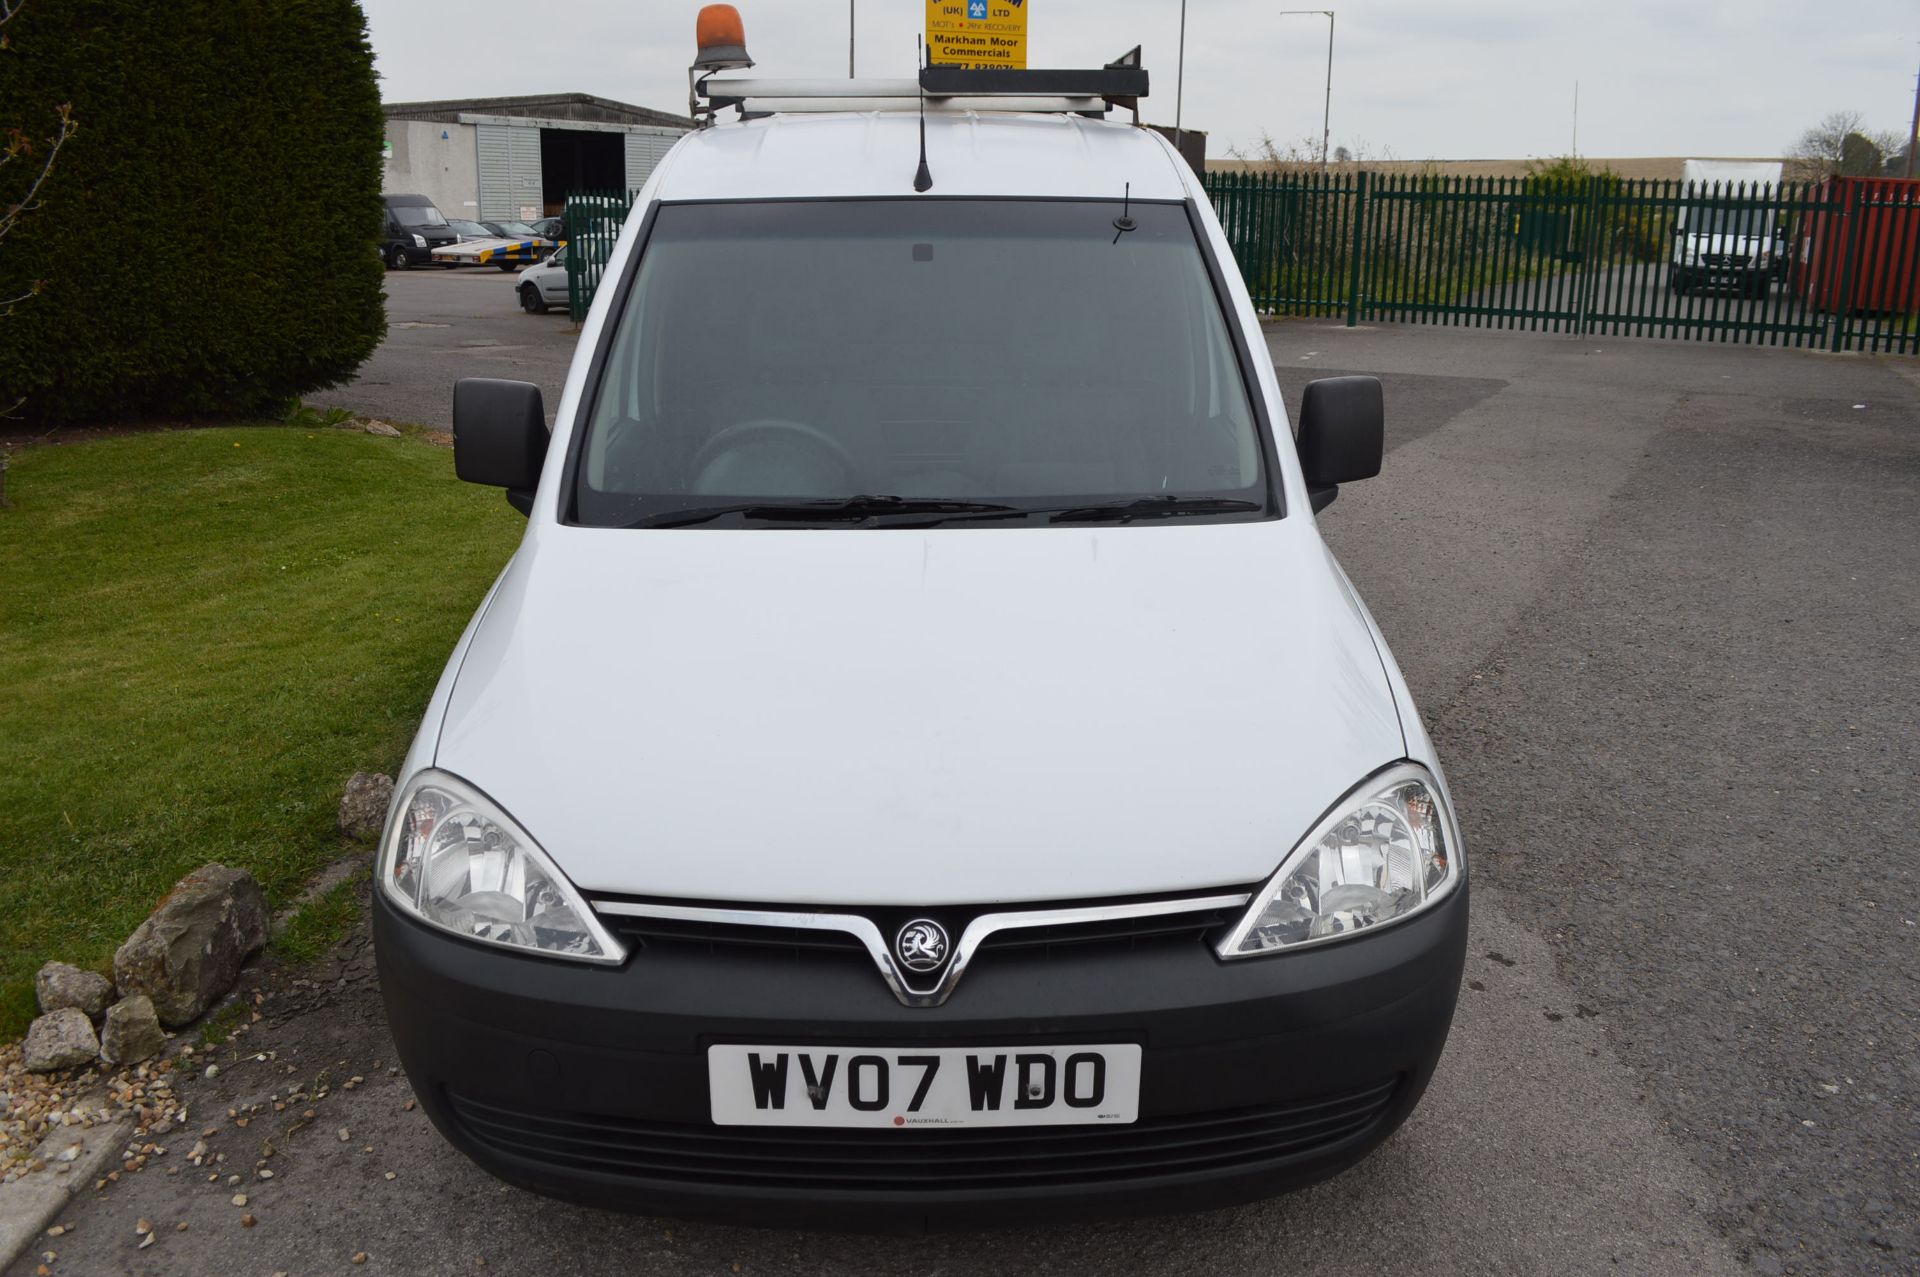 KB - 2007/07 REG VAUXHALL COMBO 2000 CDTI, SHOWING 1 OWNER   DATE OF REGISTRATION: 14TH MARCH 2007 - Image 2 of 17